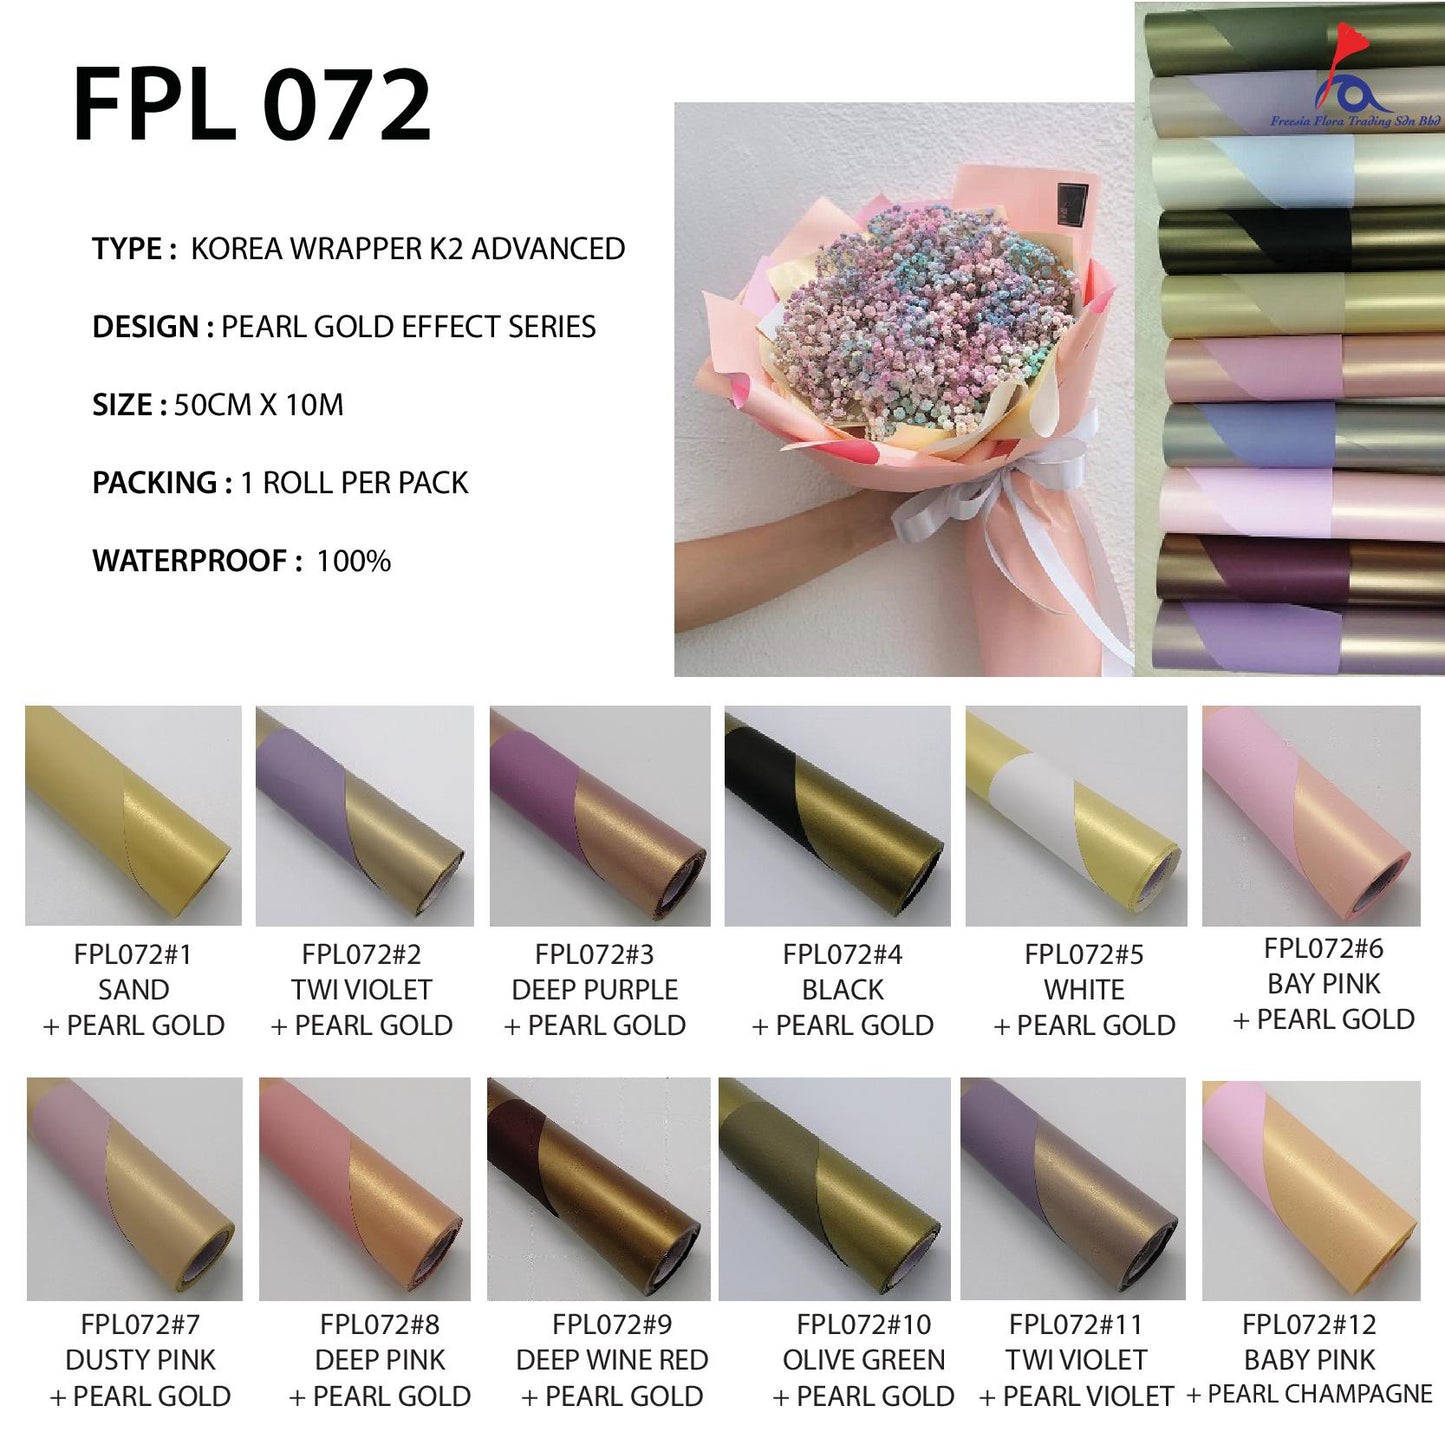 FPL072 PEARL GOLD EFFECT SERIES - Freesia